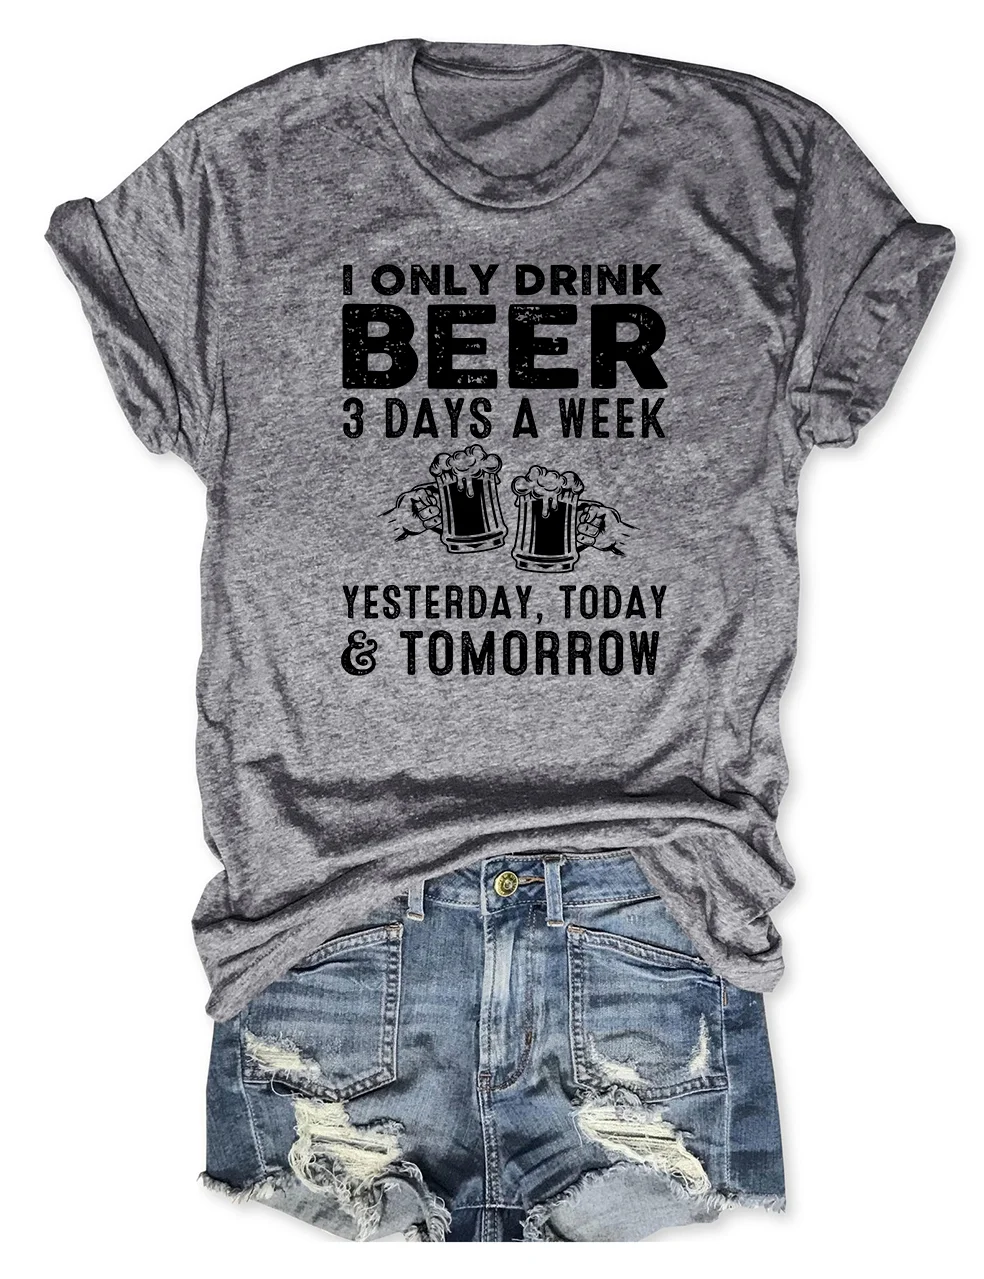 I Only Drink Beer 3 Days A Week T-Shirt